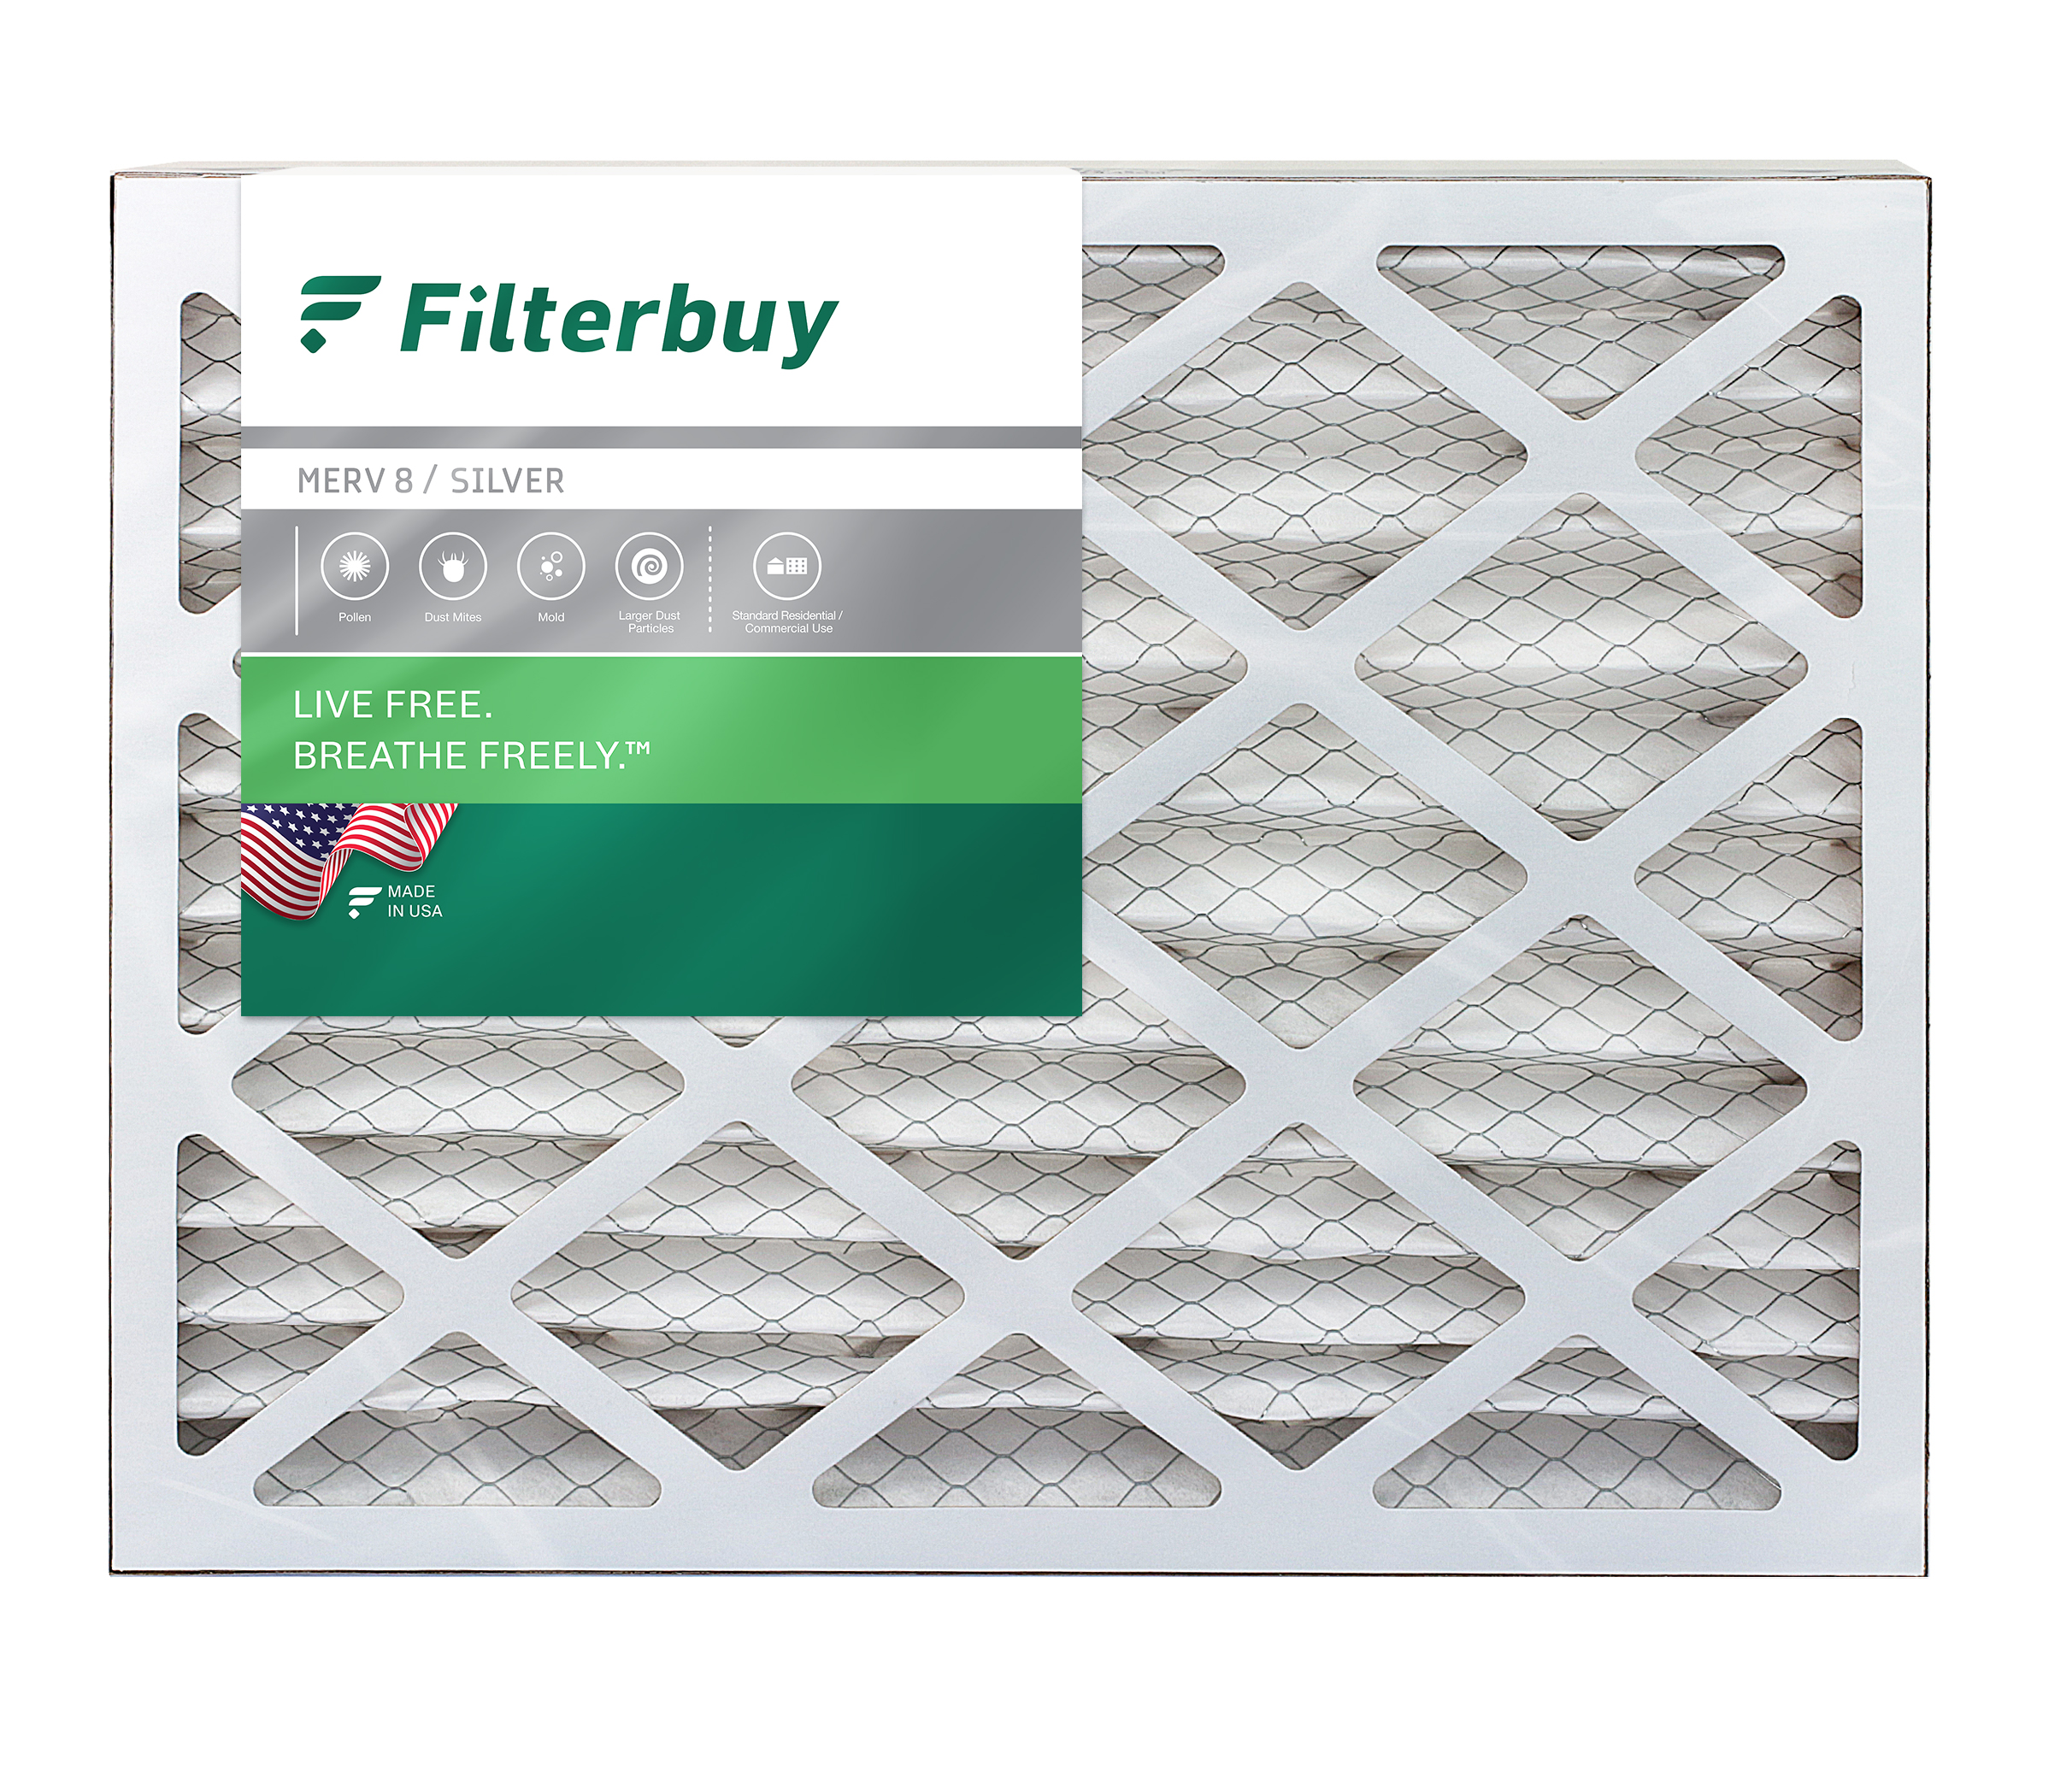 FilterBuy 16x20x4 MERV 8 Pleated AC Furnace Air Filter, Pack of 4 Filters 16x20x4 Silver 